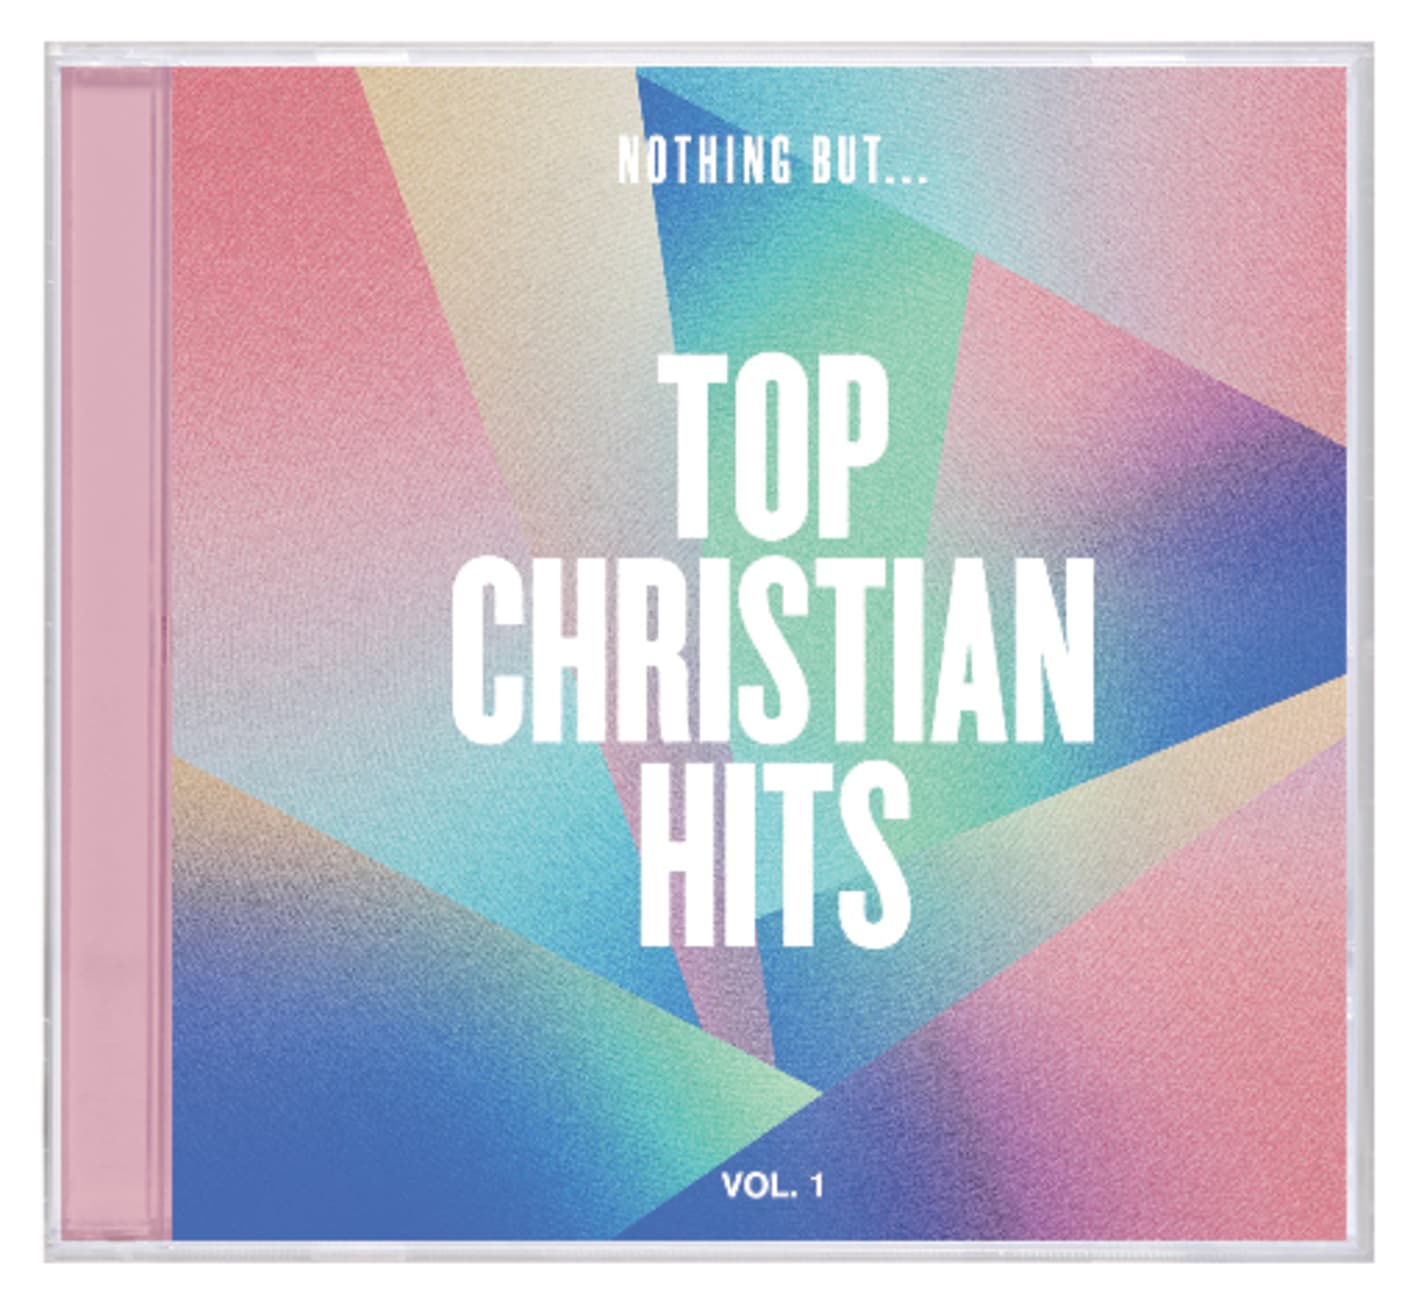 Nothing But... Top Christian Hits Volume 1 Compact Disc